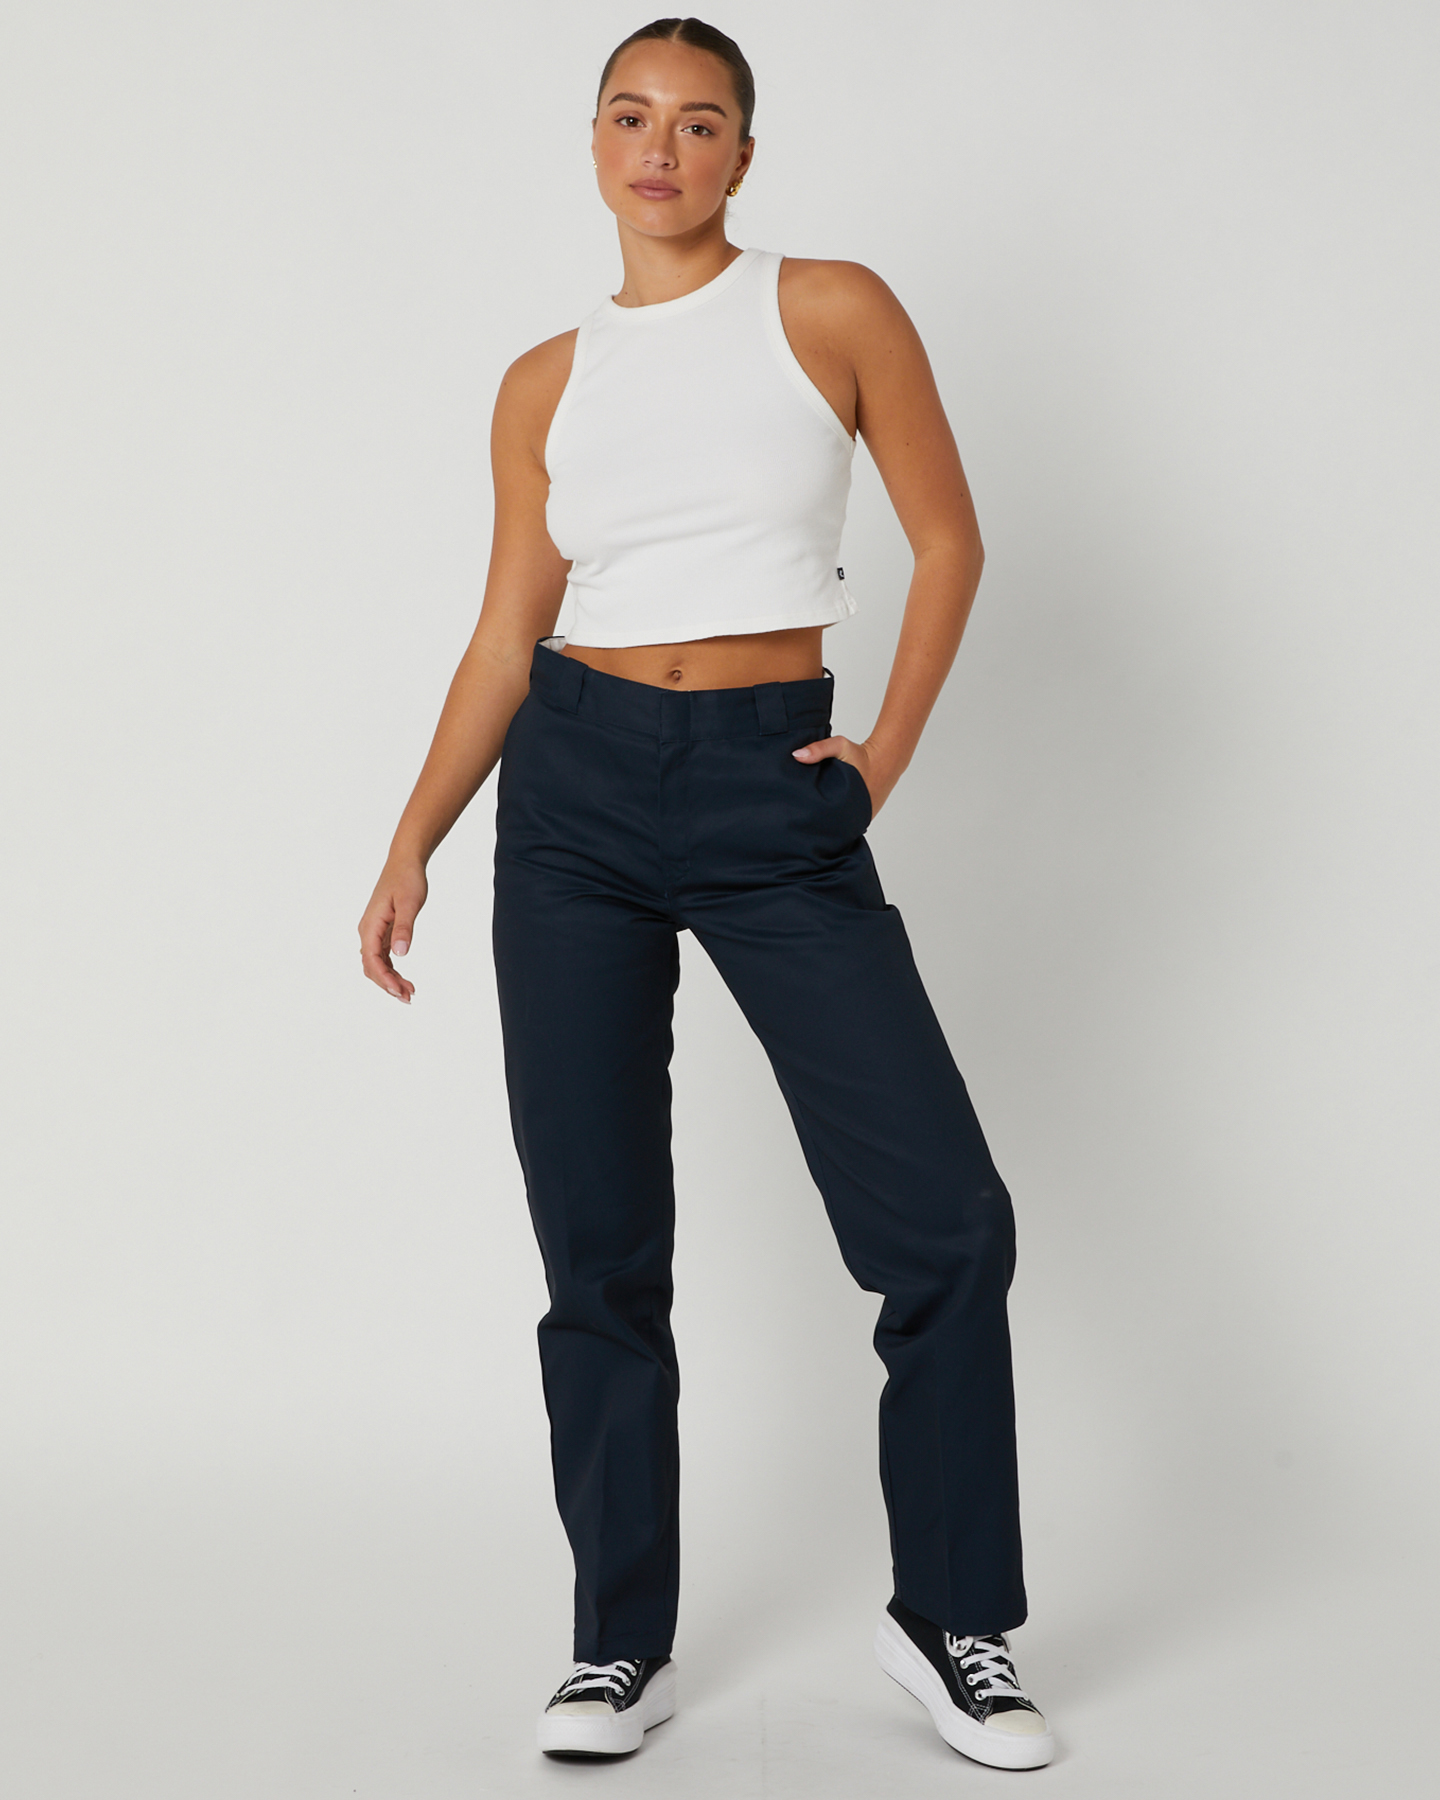 Dickies Fp875 Womens Tapered Fit Pant - Navy